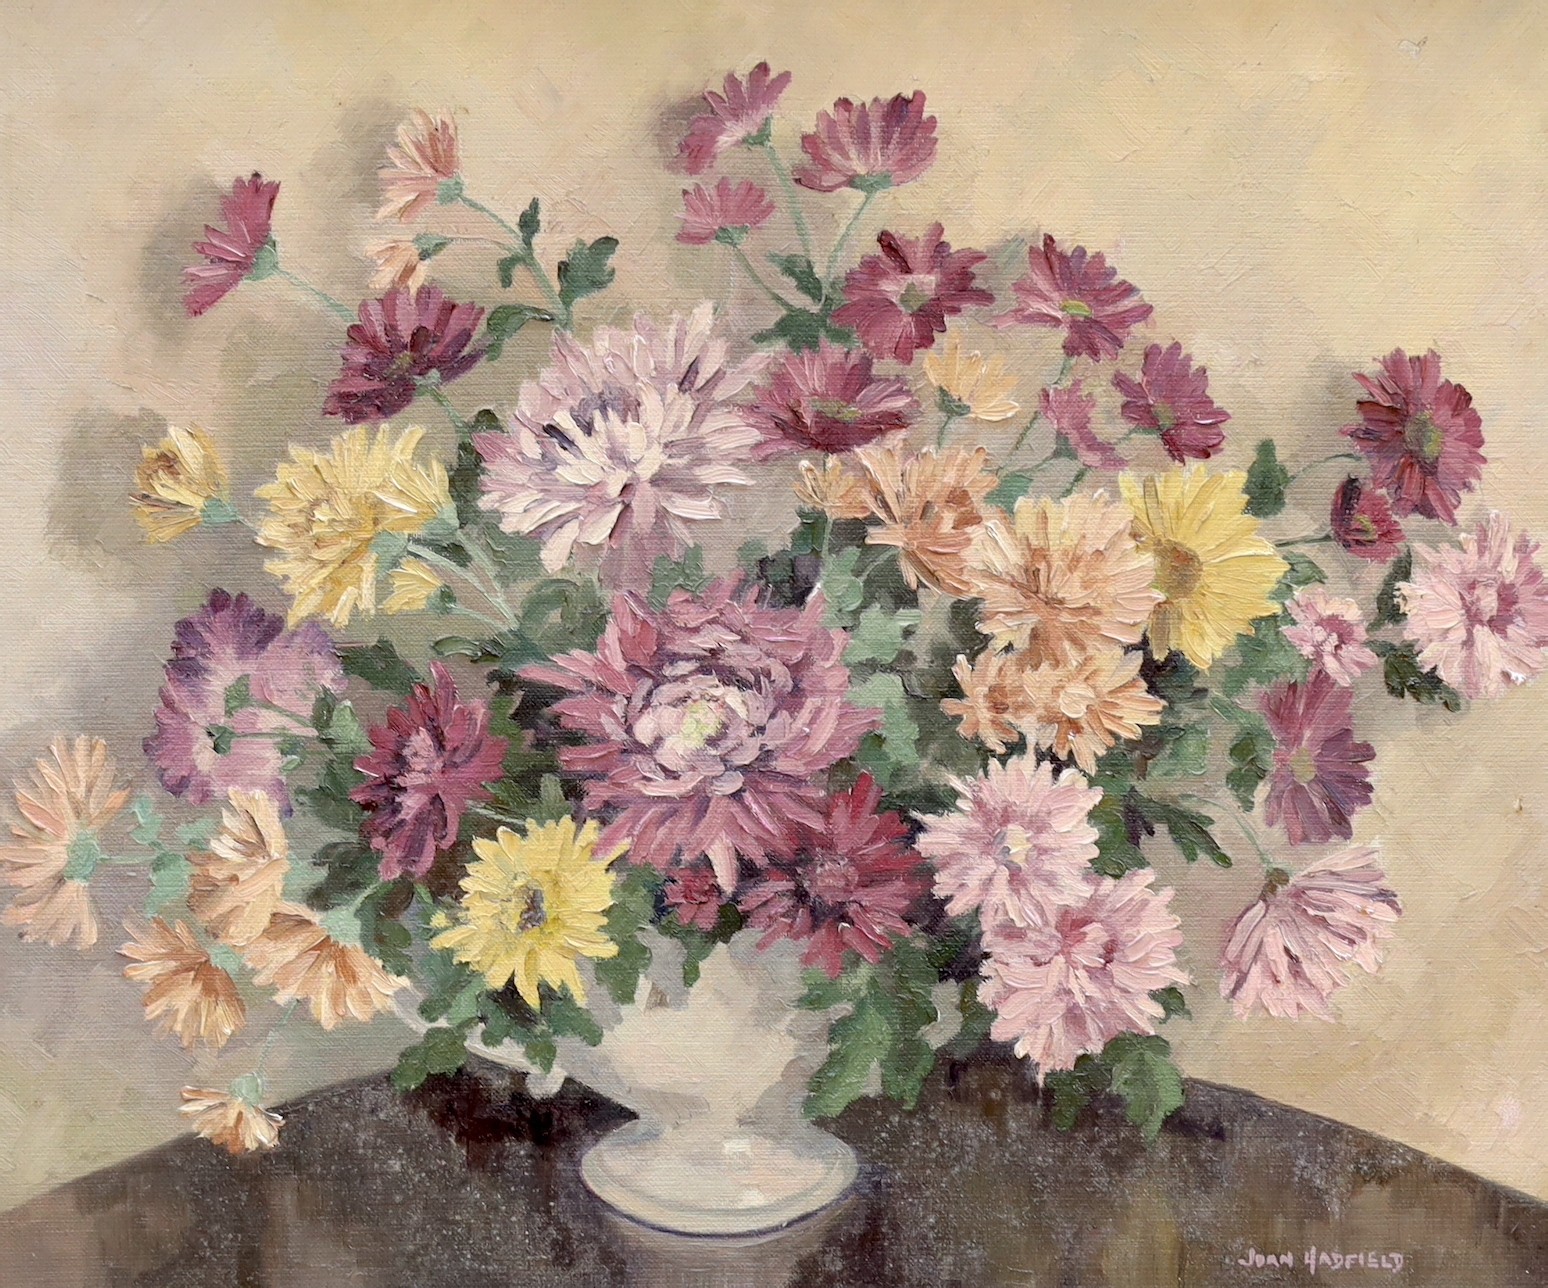 Joan Hadfield, oil on canvas, 'Chrysanthemums', signed, 50 x 60cm